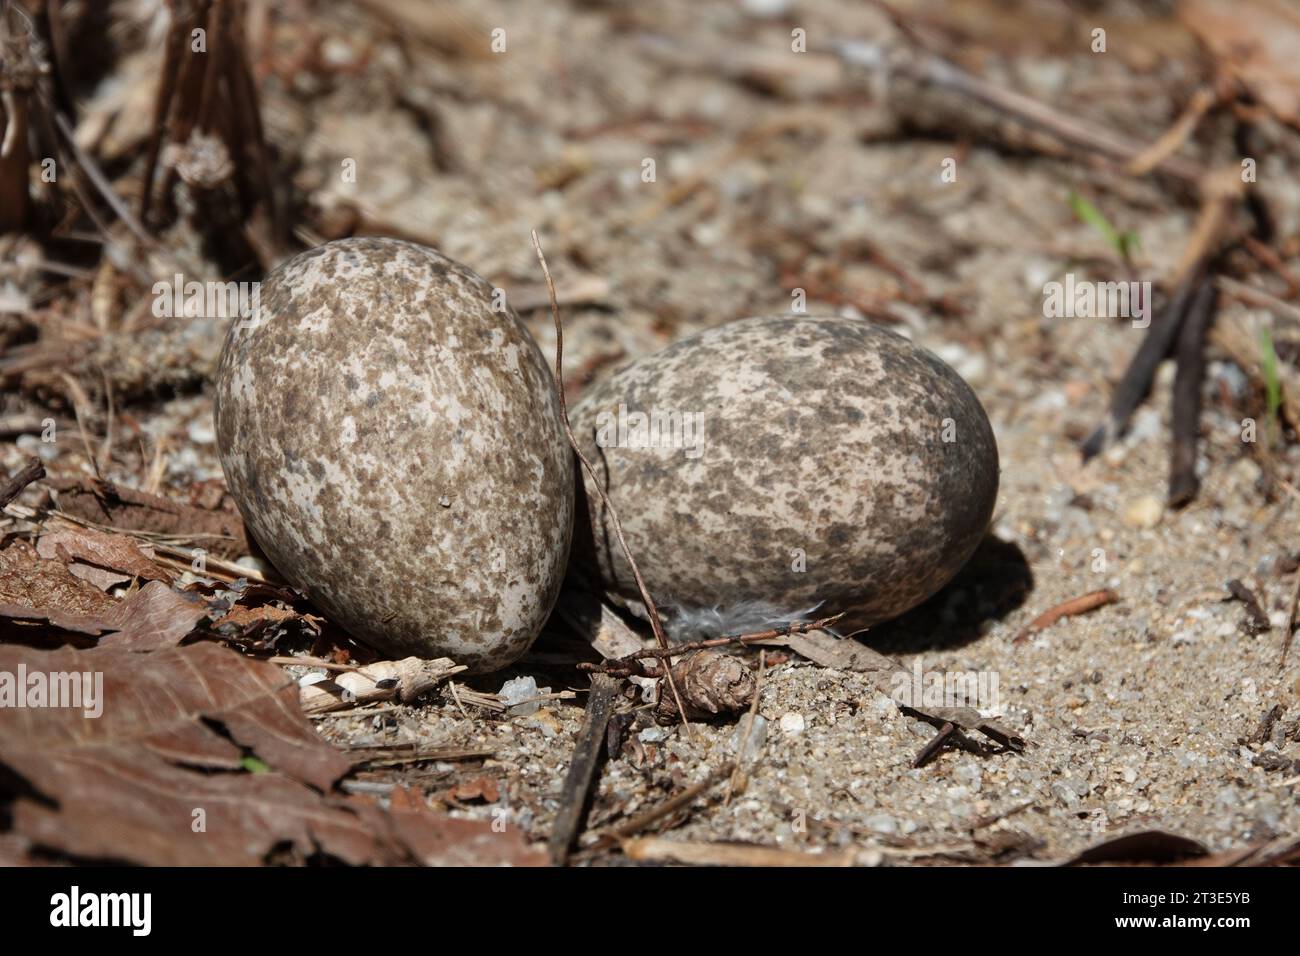 Bush-stone Curlew Eggs in ground nest in restored vegetation area, photographed at Wonga, Far North Queensland, Australia Stock Photo